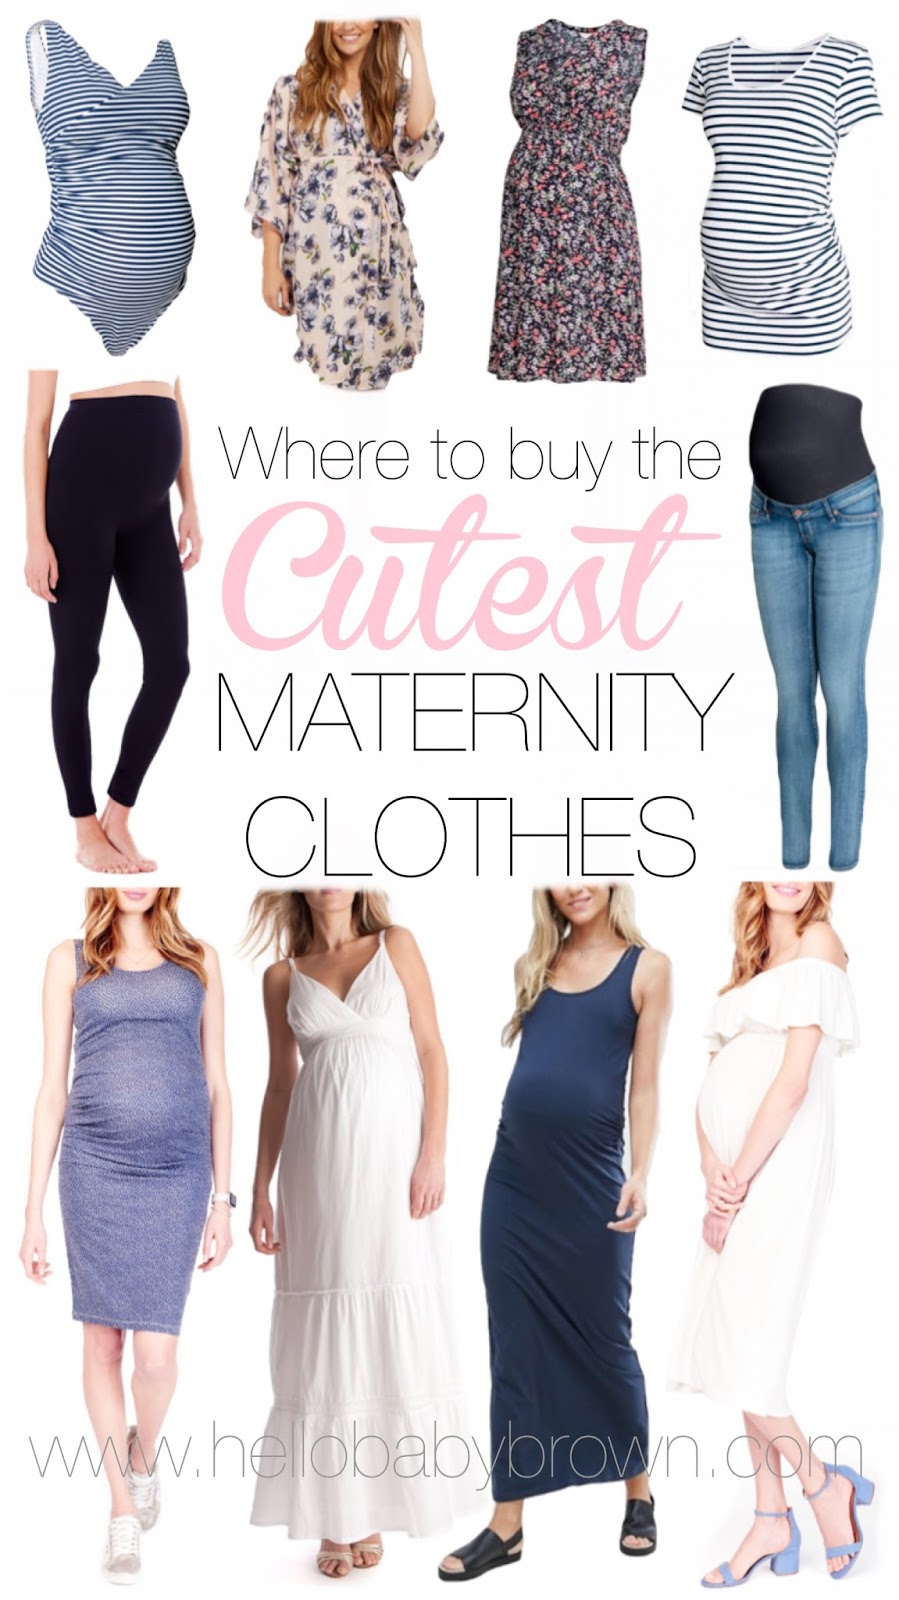 Hello Baby Brown: Where to buy the cutest maternity clothing